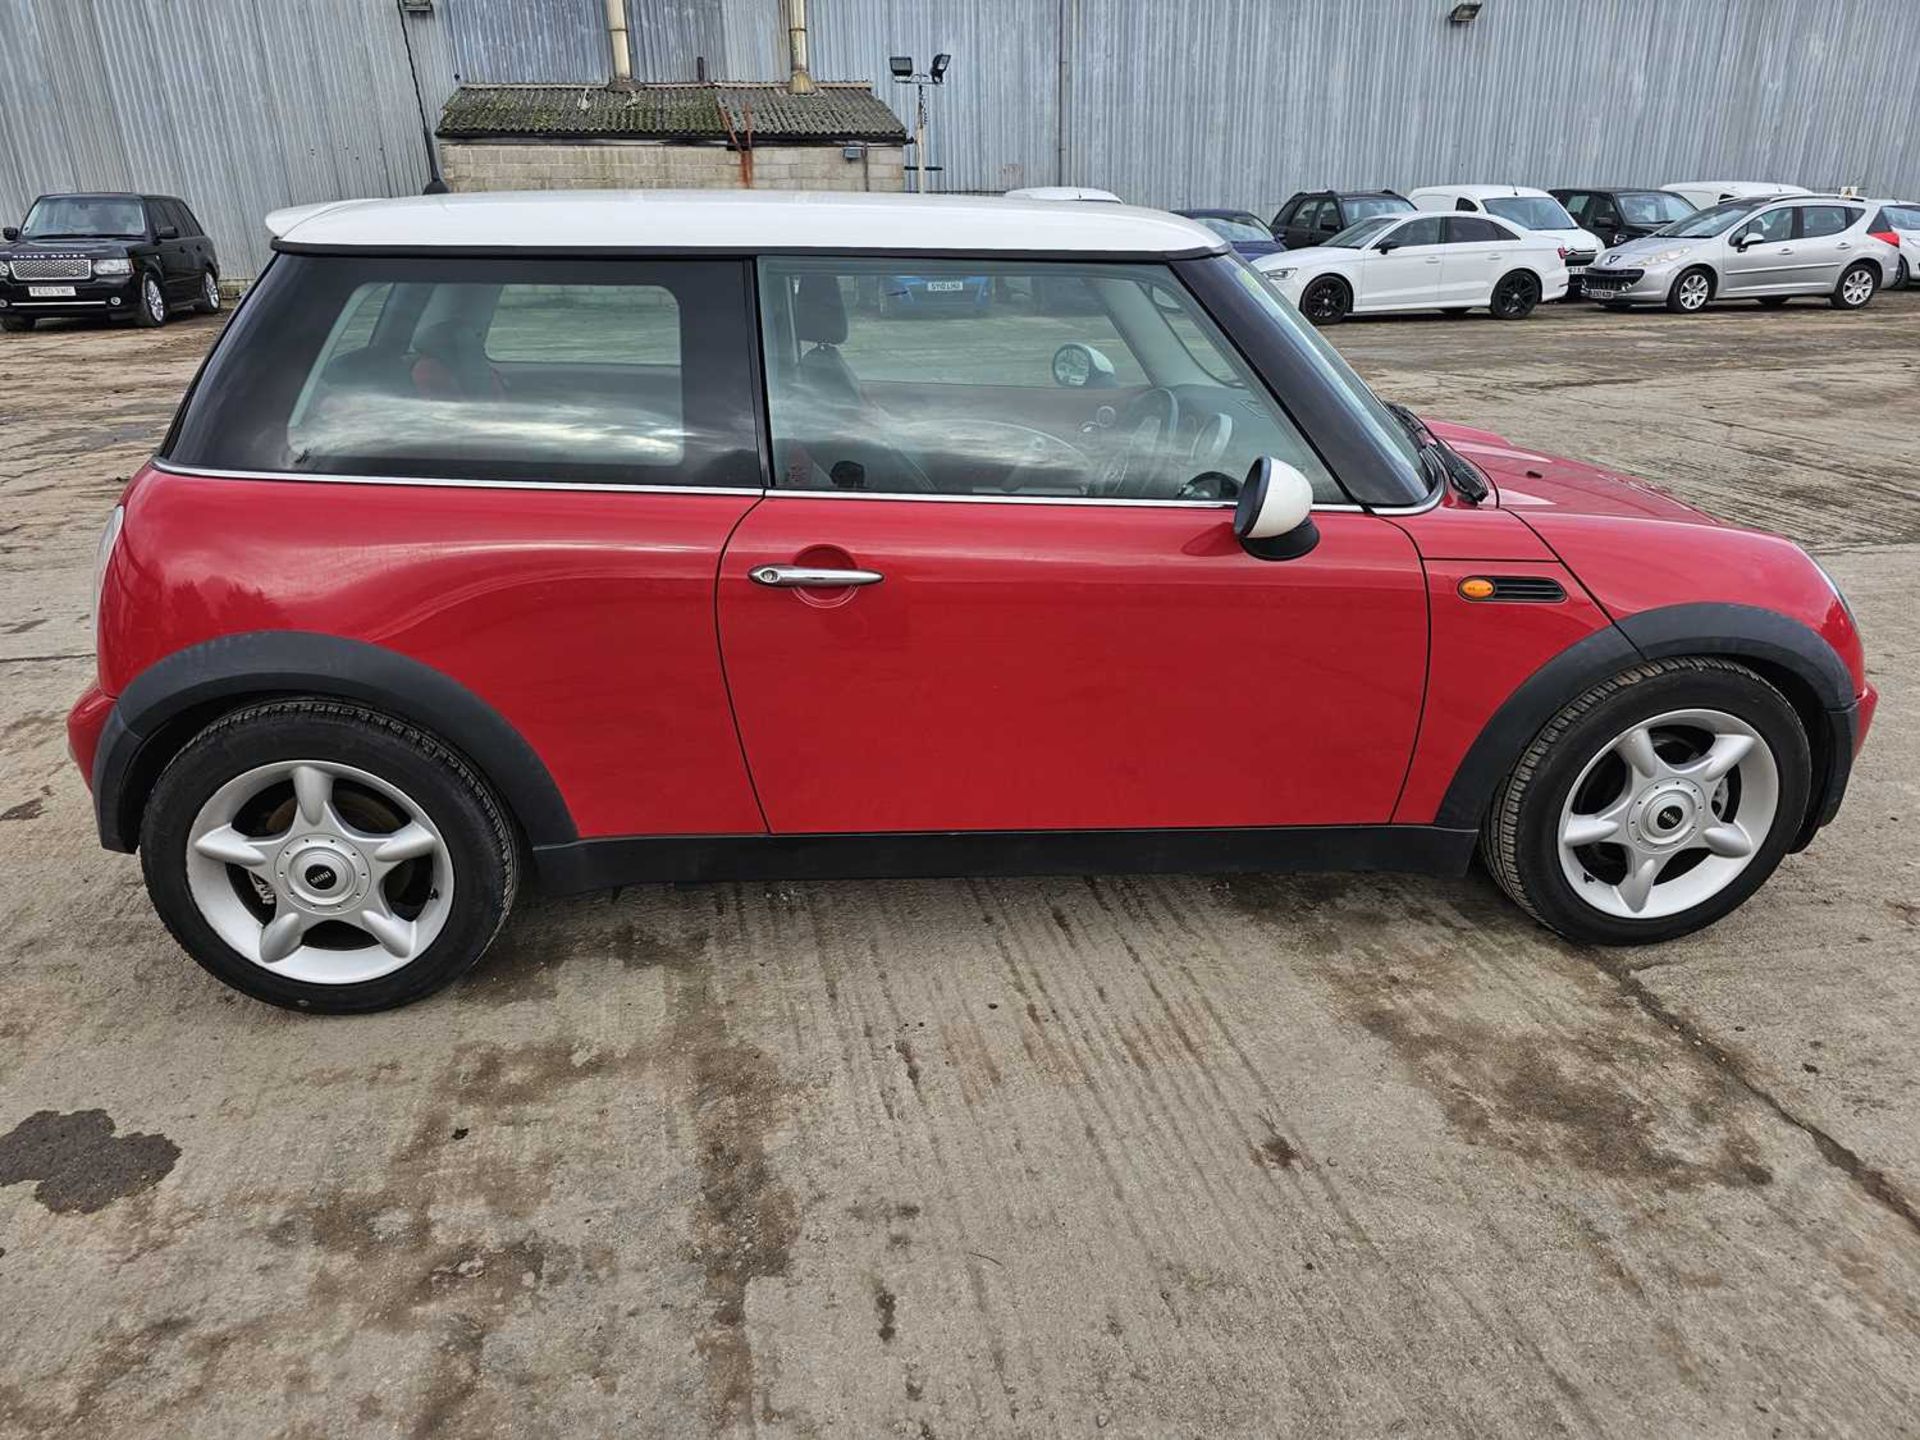 2004 Mini Cooper, 5 Speed, Half Leather, Heated Seats, A/C (Reg. Docs. & Service History Available,  - Image 6 of 29